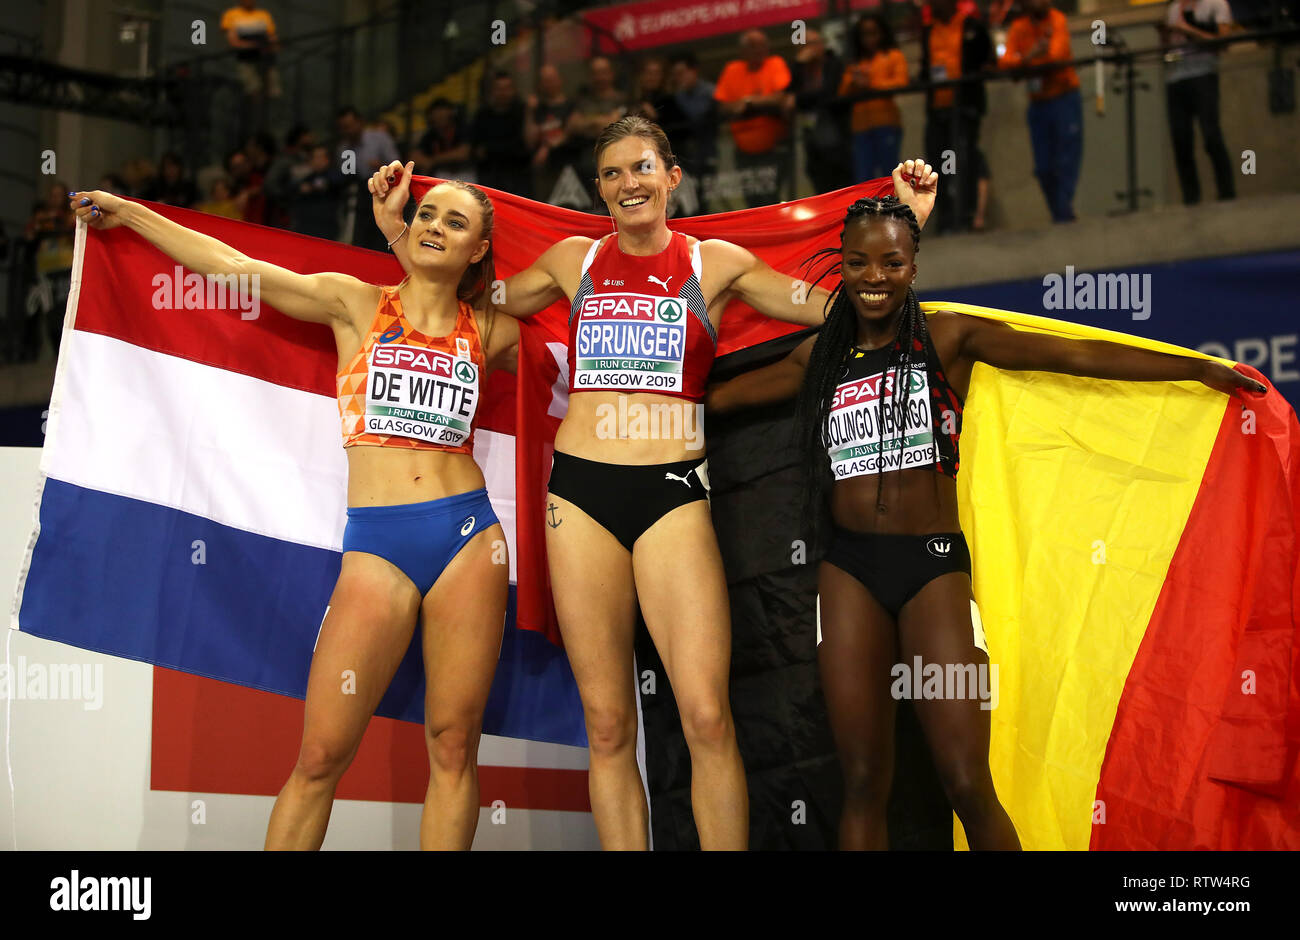 Switzerland's Lea Sprunger (centre), Netherland's Lisanne de Witte (left) and Belgium's Cynthia Bolingo Mbongo celebrate after the Women's 400m final during day two of the European Indoor Athletics Championships at the Emirates Arena, Glasgow. Stock Photo